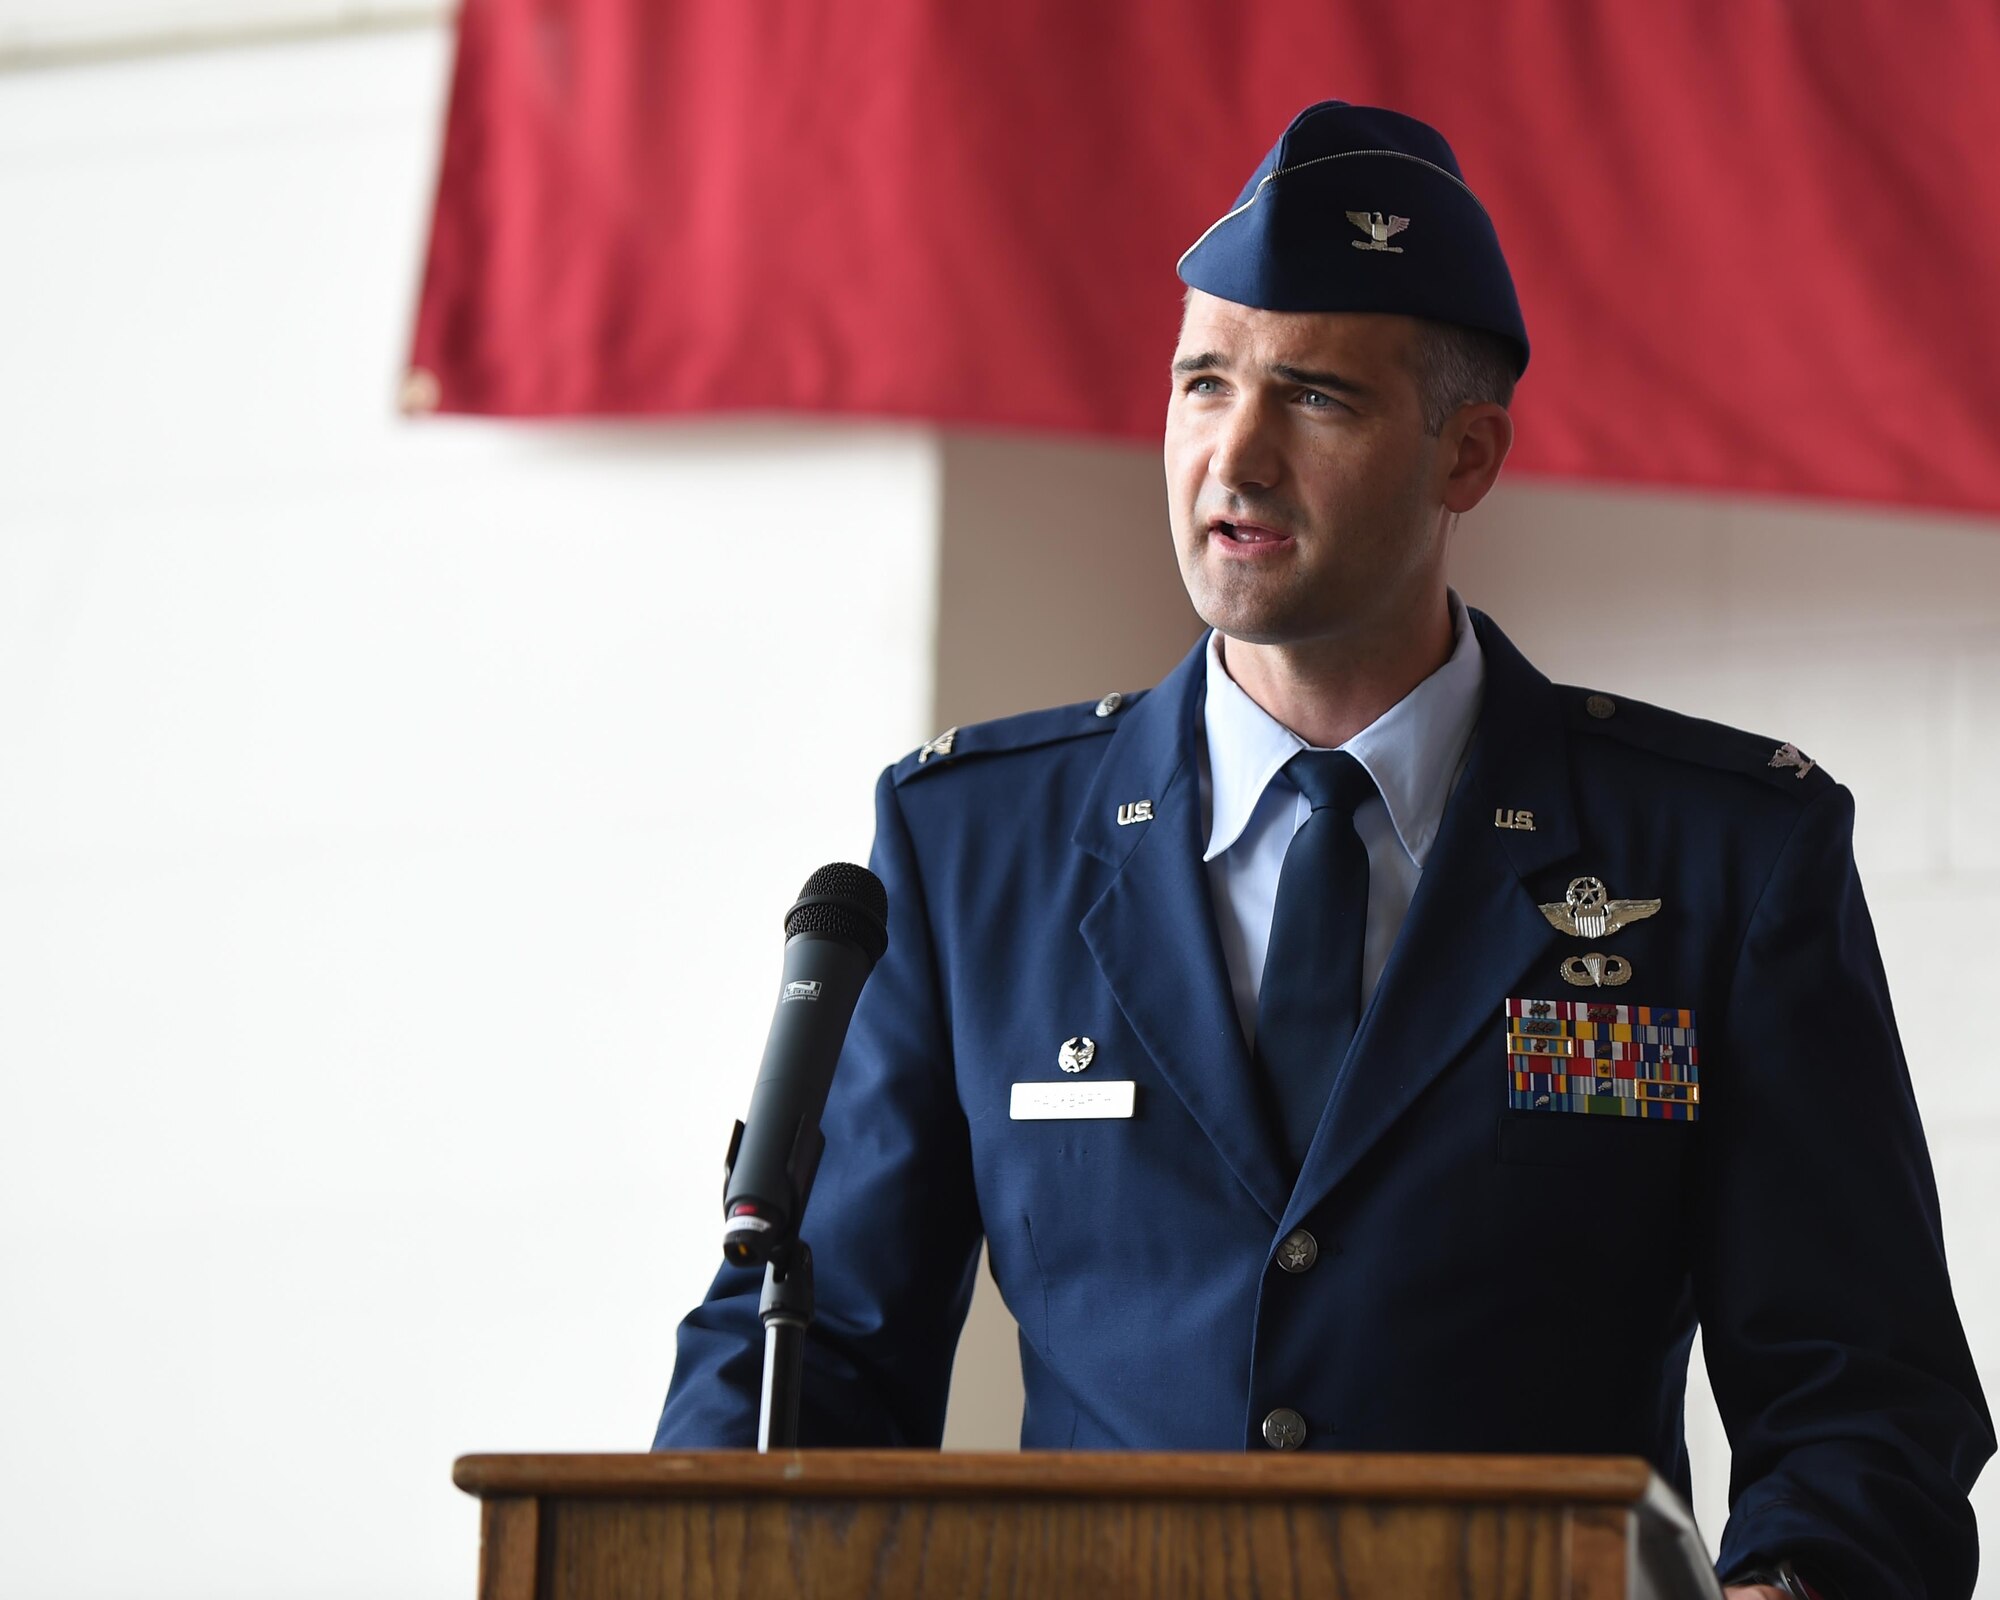 U.S. Air Force Col. James Hackbarth, 317th Operations Group commander, addresses his new unit, as well as the 317th Airlift Wing, at Dyess Air Force Base, Texas July, 6, 2017. The 317th OG was activated when the 317th Airlift Group was deactivated and activated as the 317th Airlift Wing. (U.S. Air Force photo by Senior Airman Alexander Guerrero)